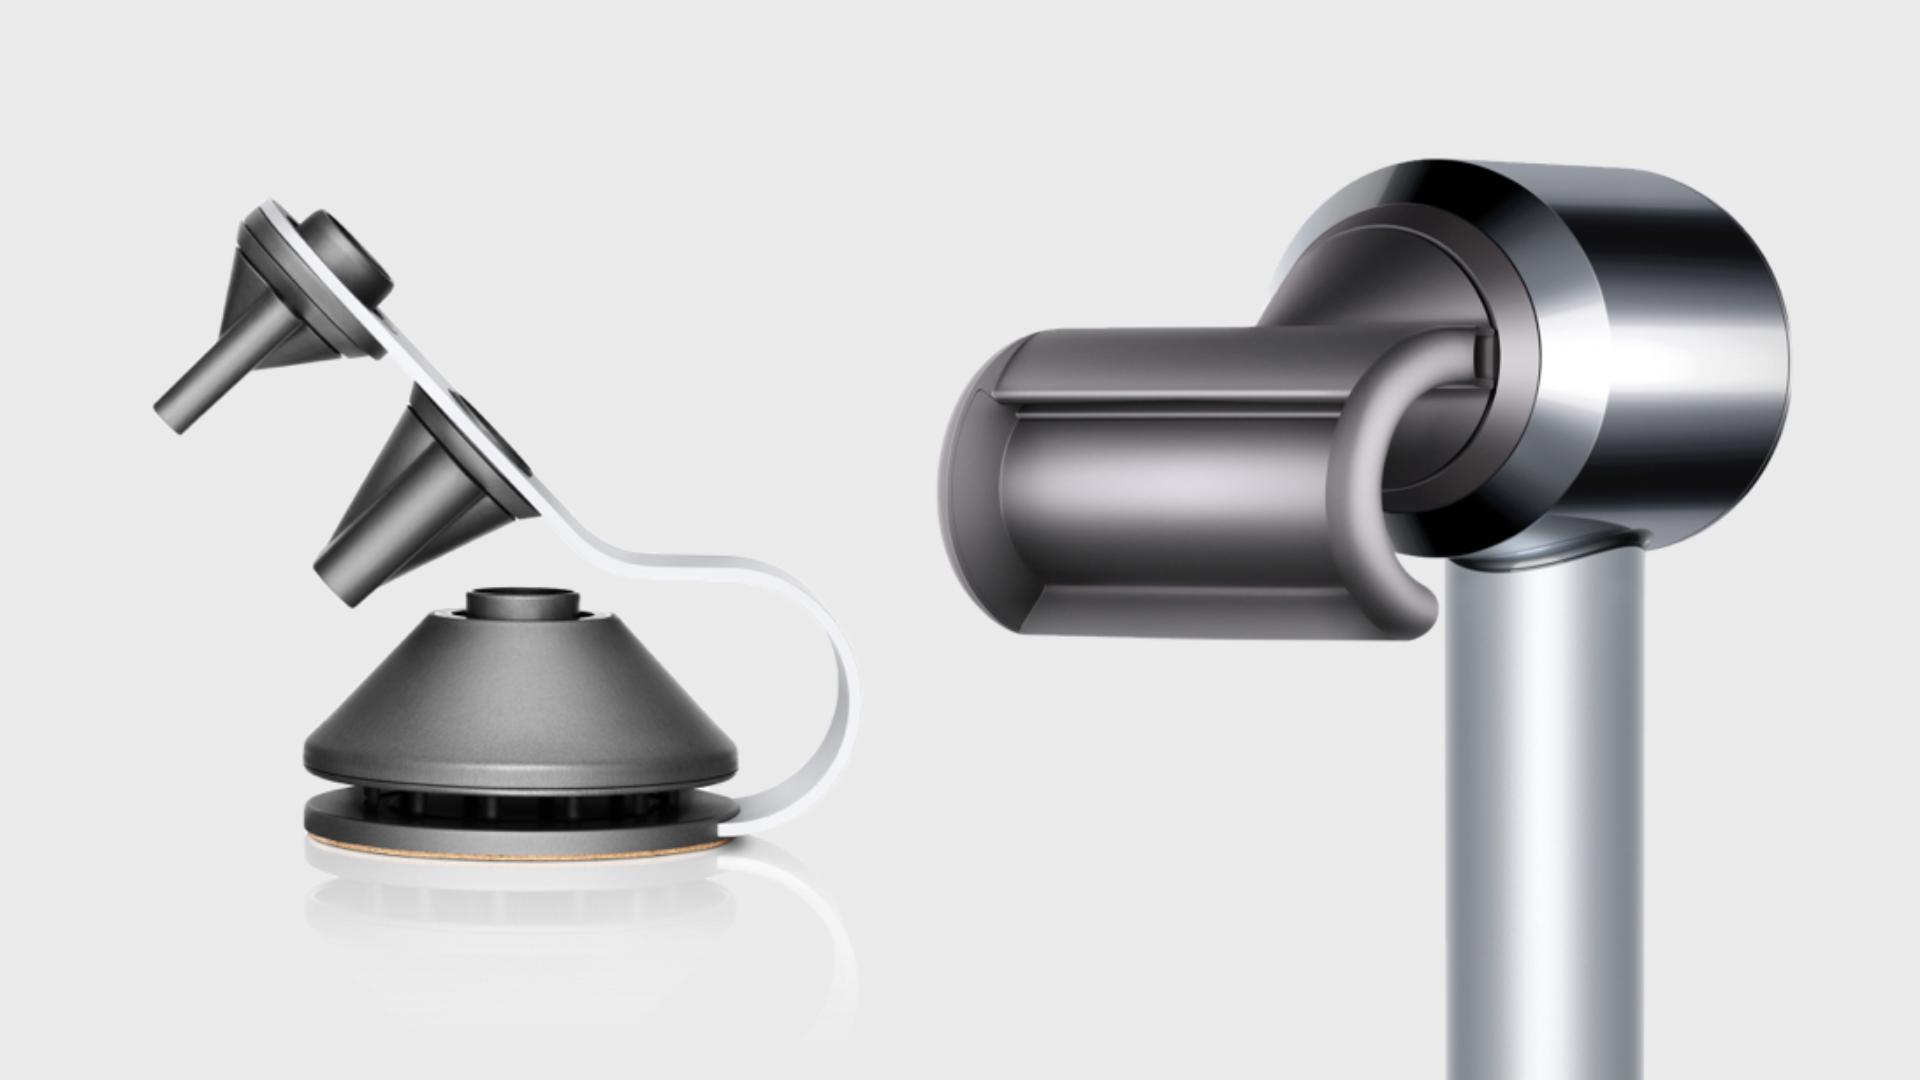 Dyson-designed display stand, wall cradle and magnetic attachment docks